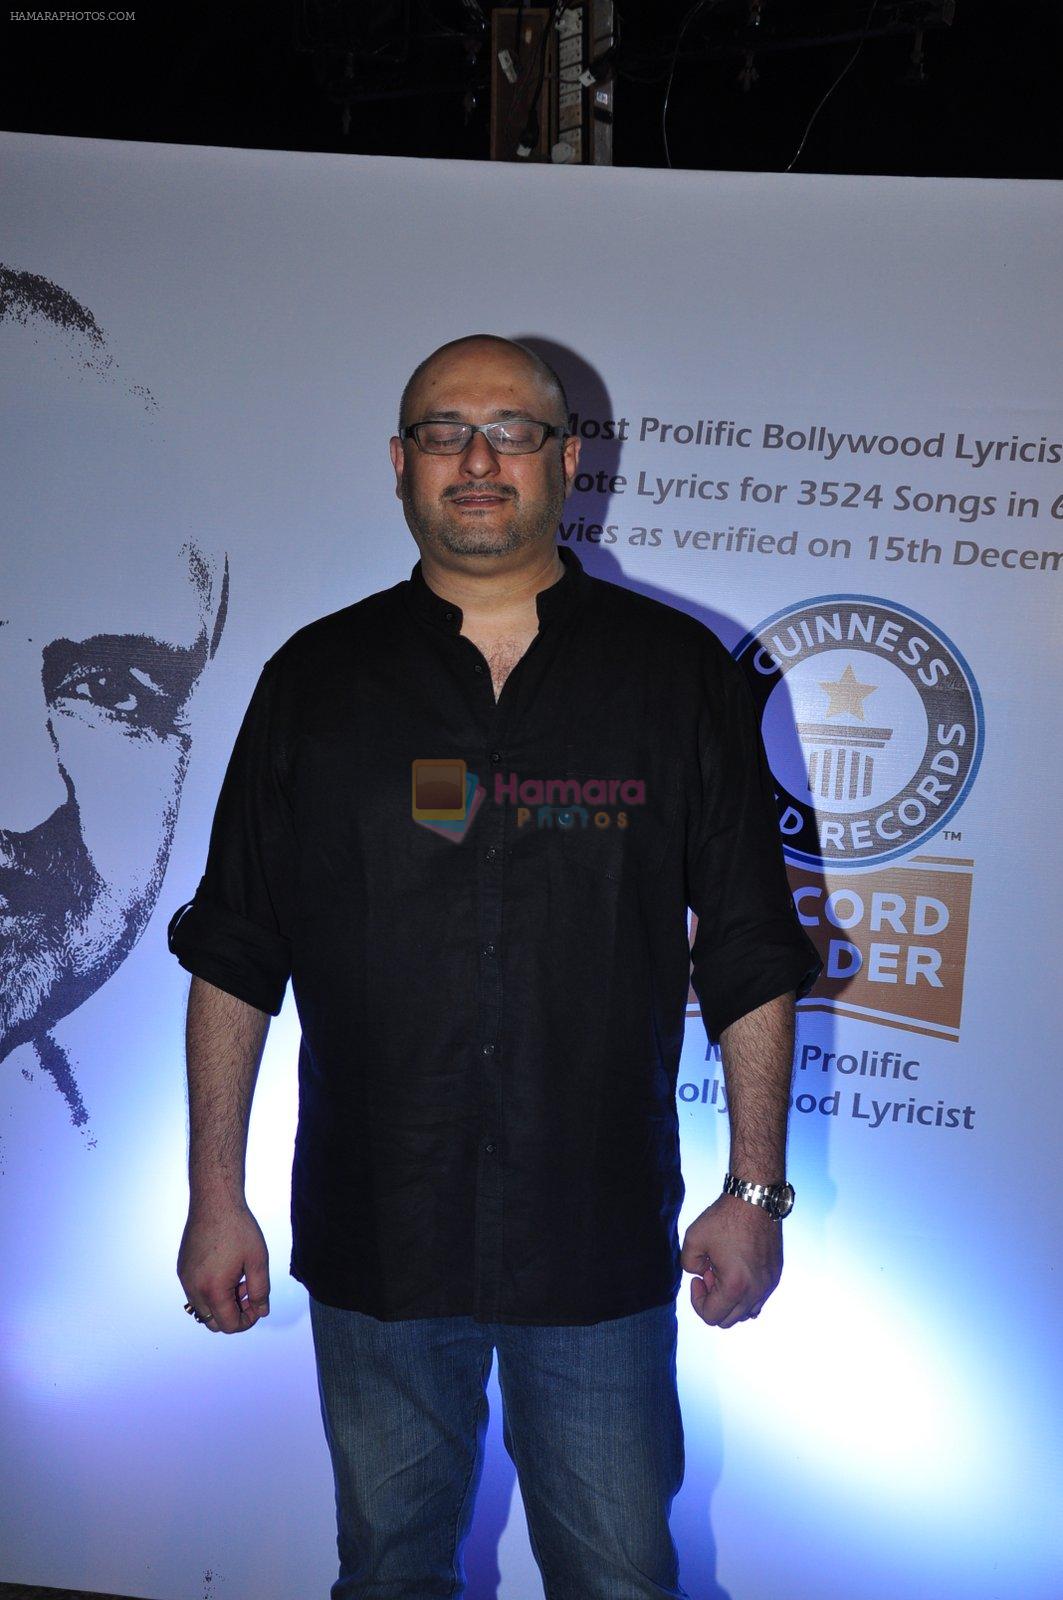 at Sameer in Guinness book of records bash with music fraternity on 15th Feb 2016